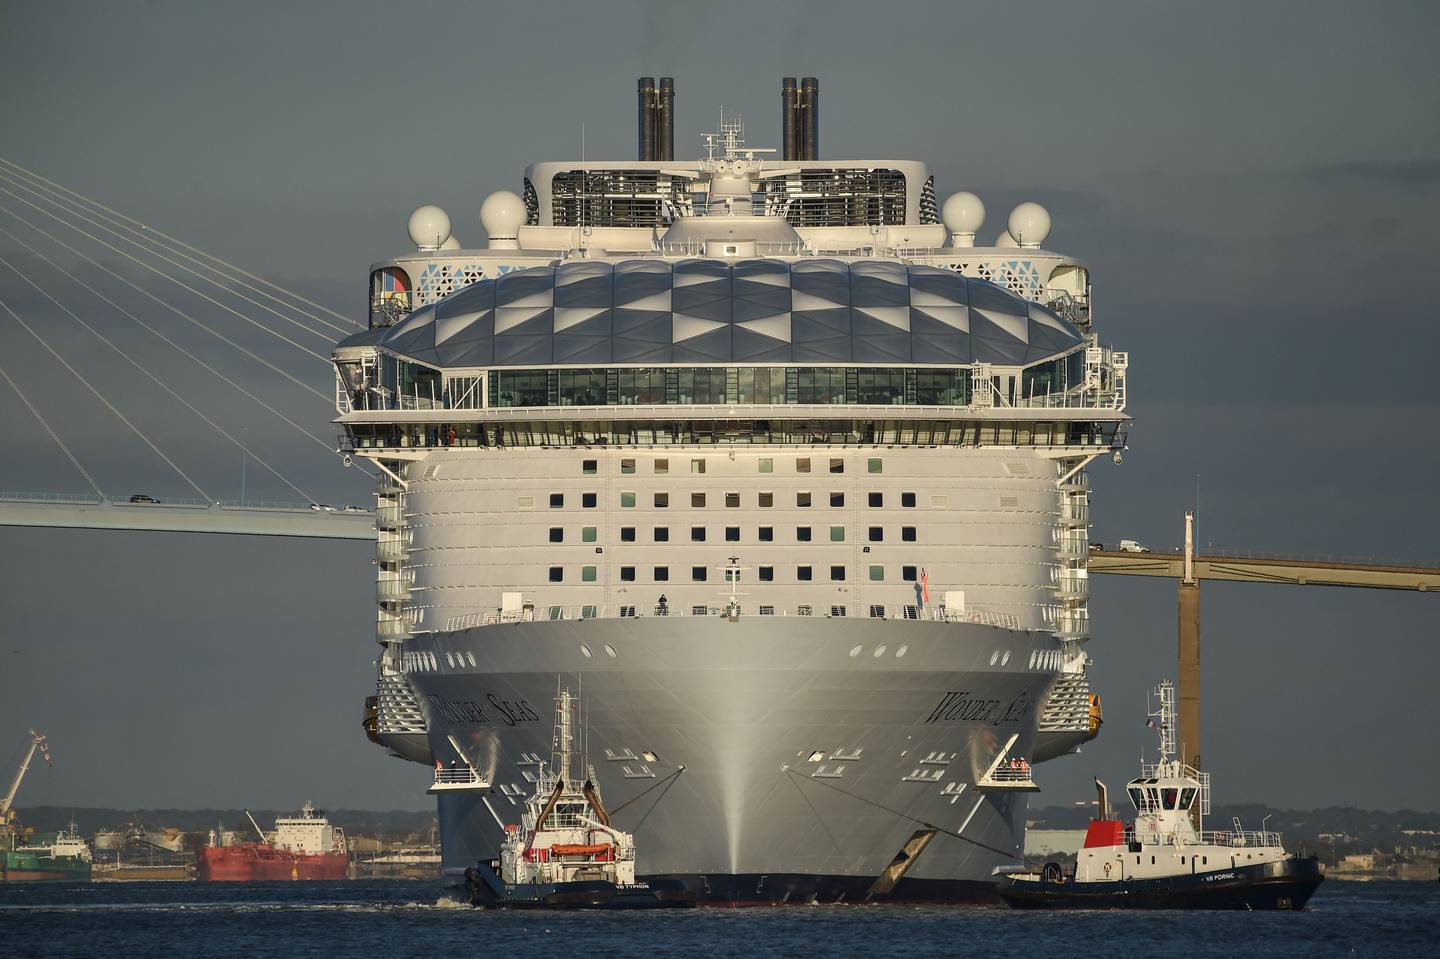 The 'Wonder of the Seas' can host 6,988 guests and 2,300 crew members. AFP